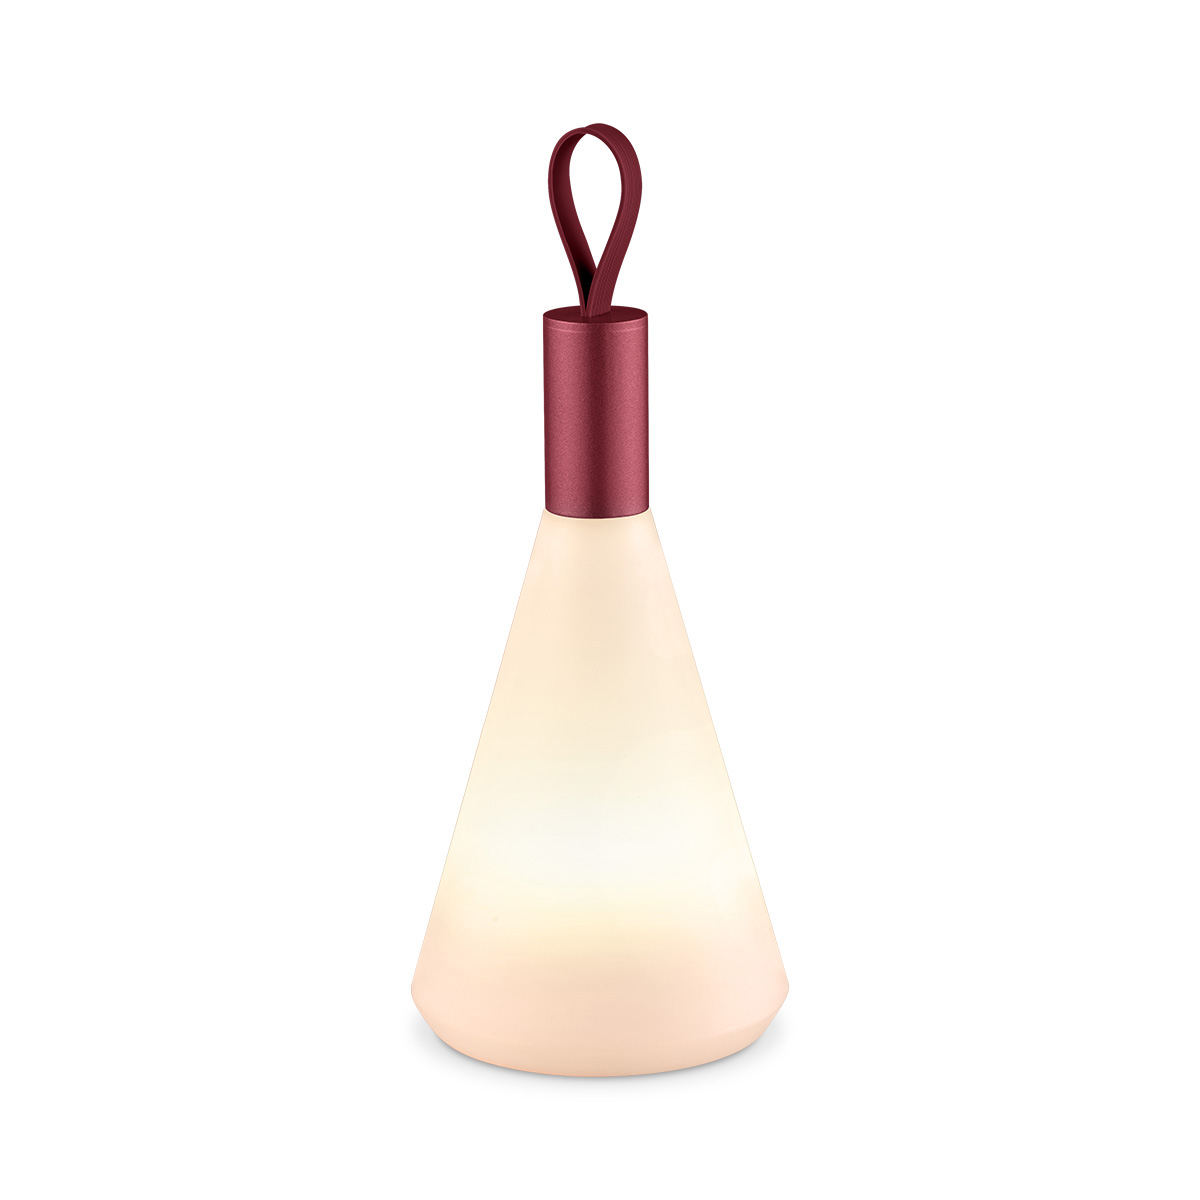 Tangla lighting - TLT7652-01RD - LED pendant and table lamp - outdoor lighting - rechargeable plastic and metal - red - vase